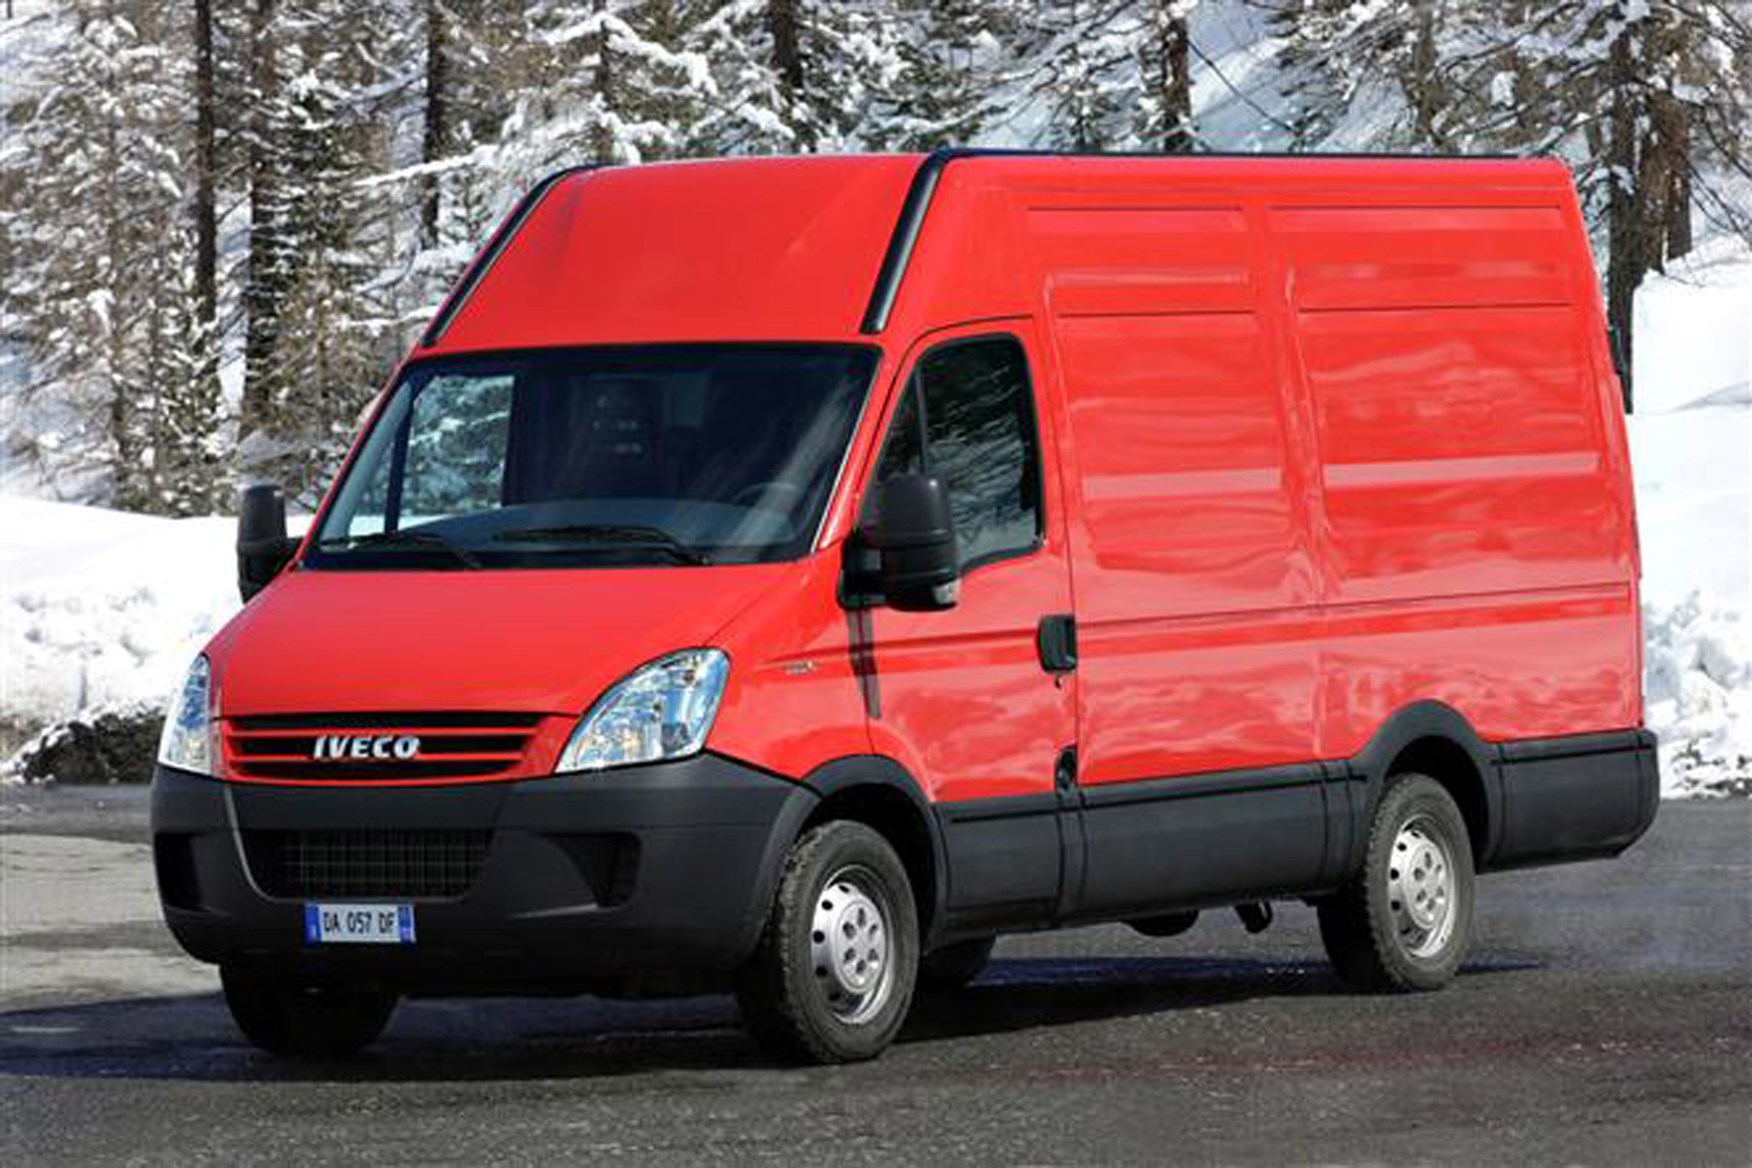 Iveco Daily 2006-2009 review on Parkers Vans - exterior